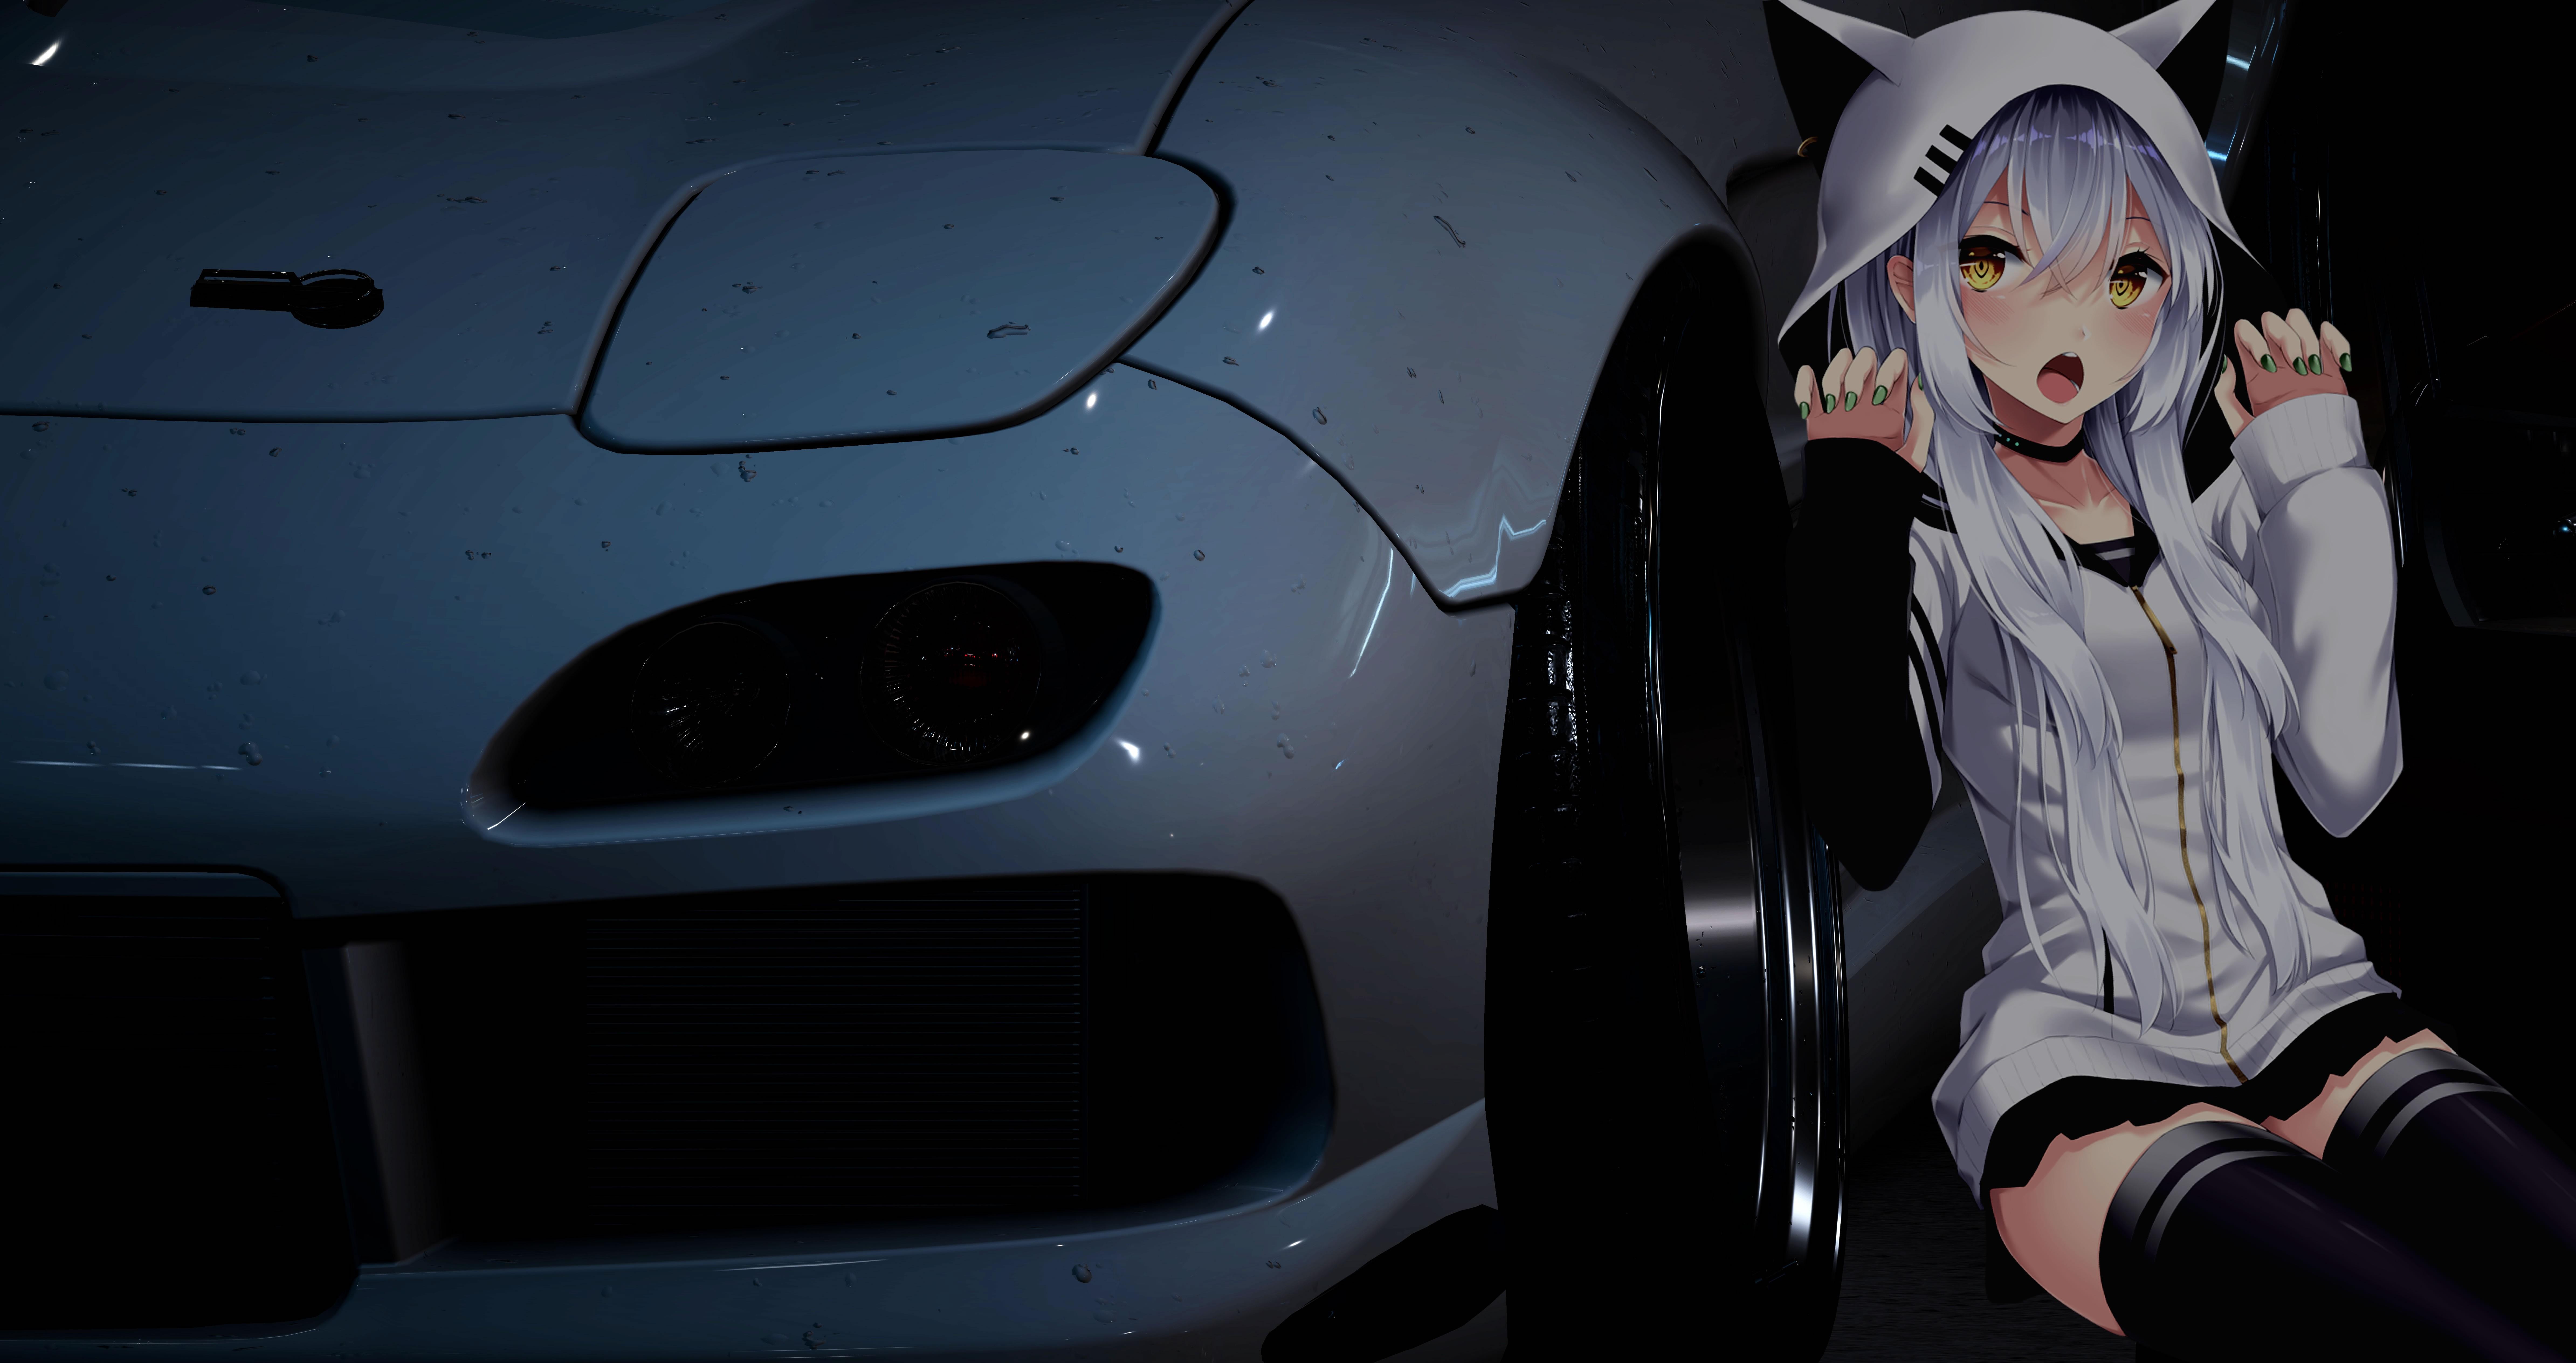 Anime JDM Cars Wallpapers  Wallpaper Cave